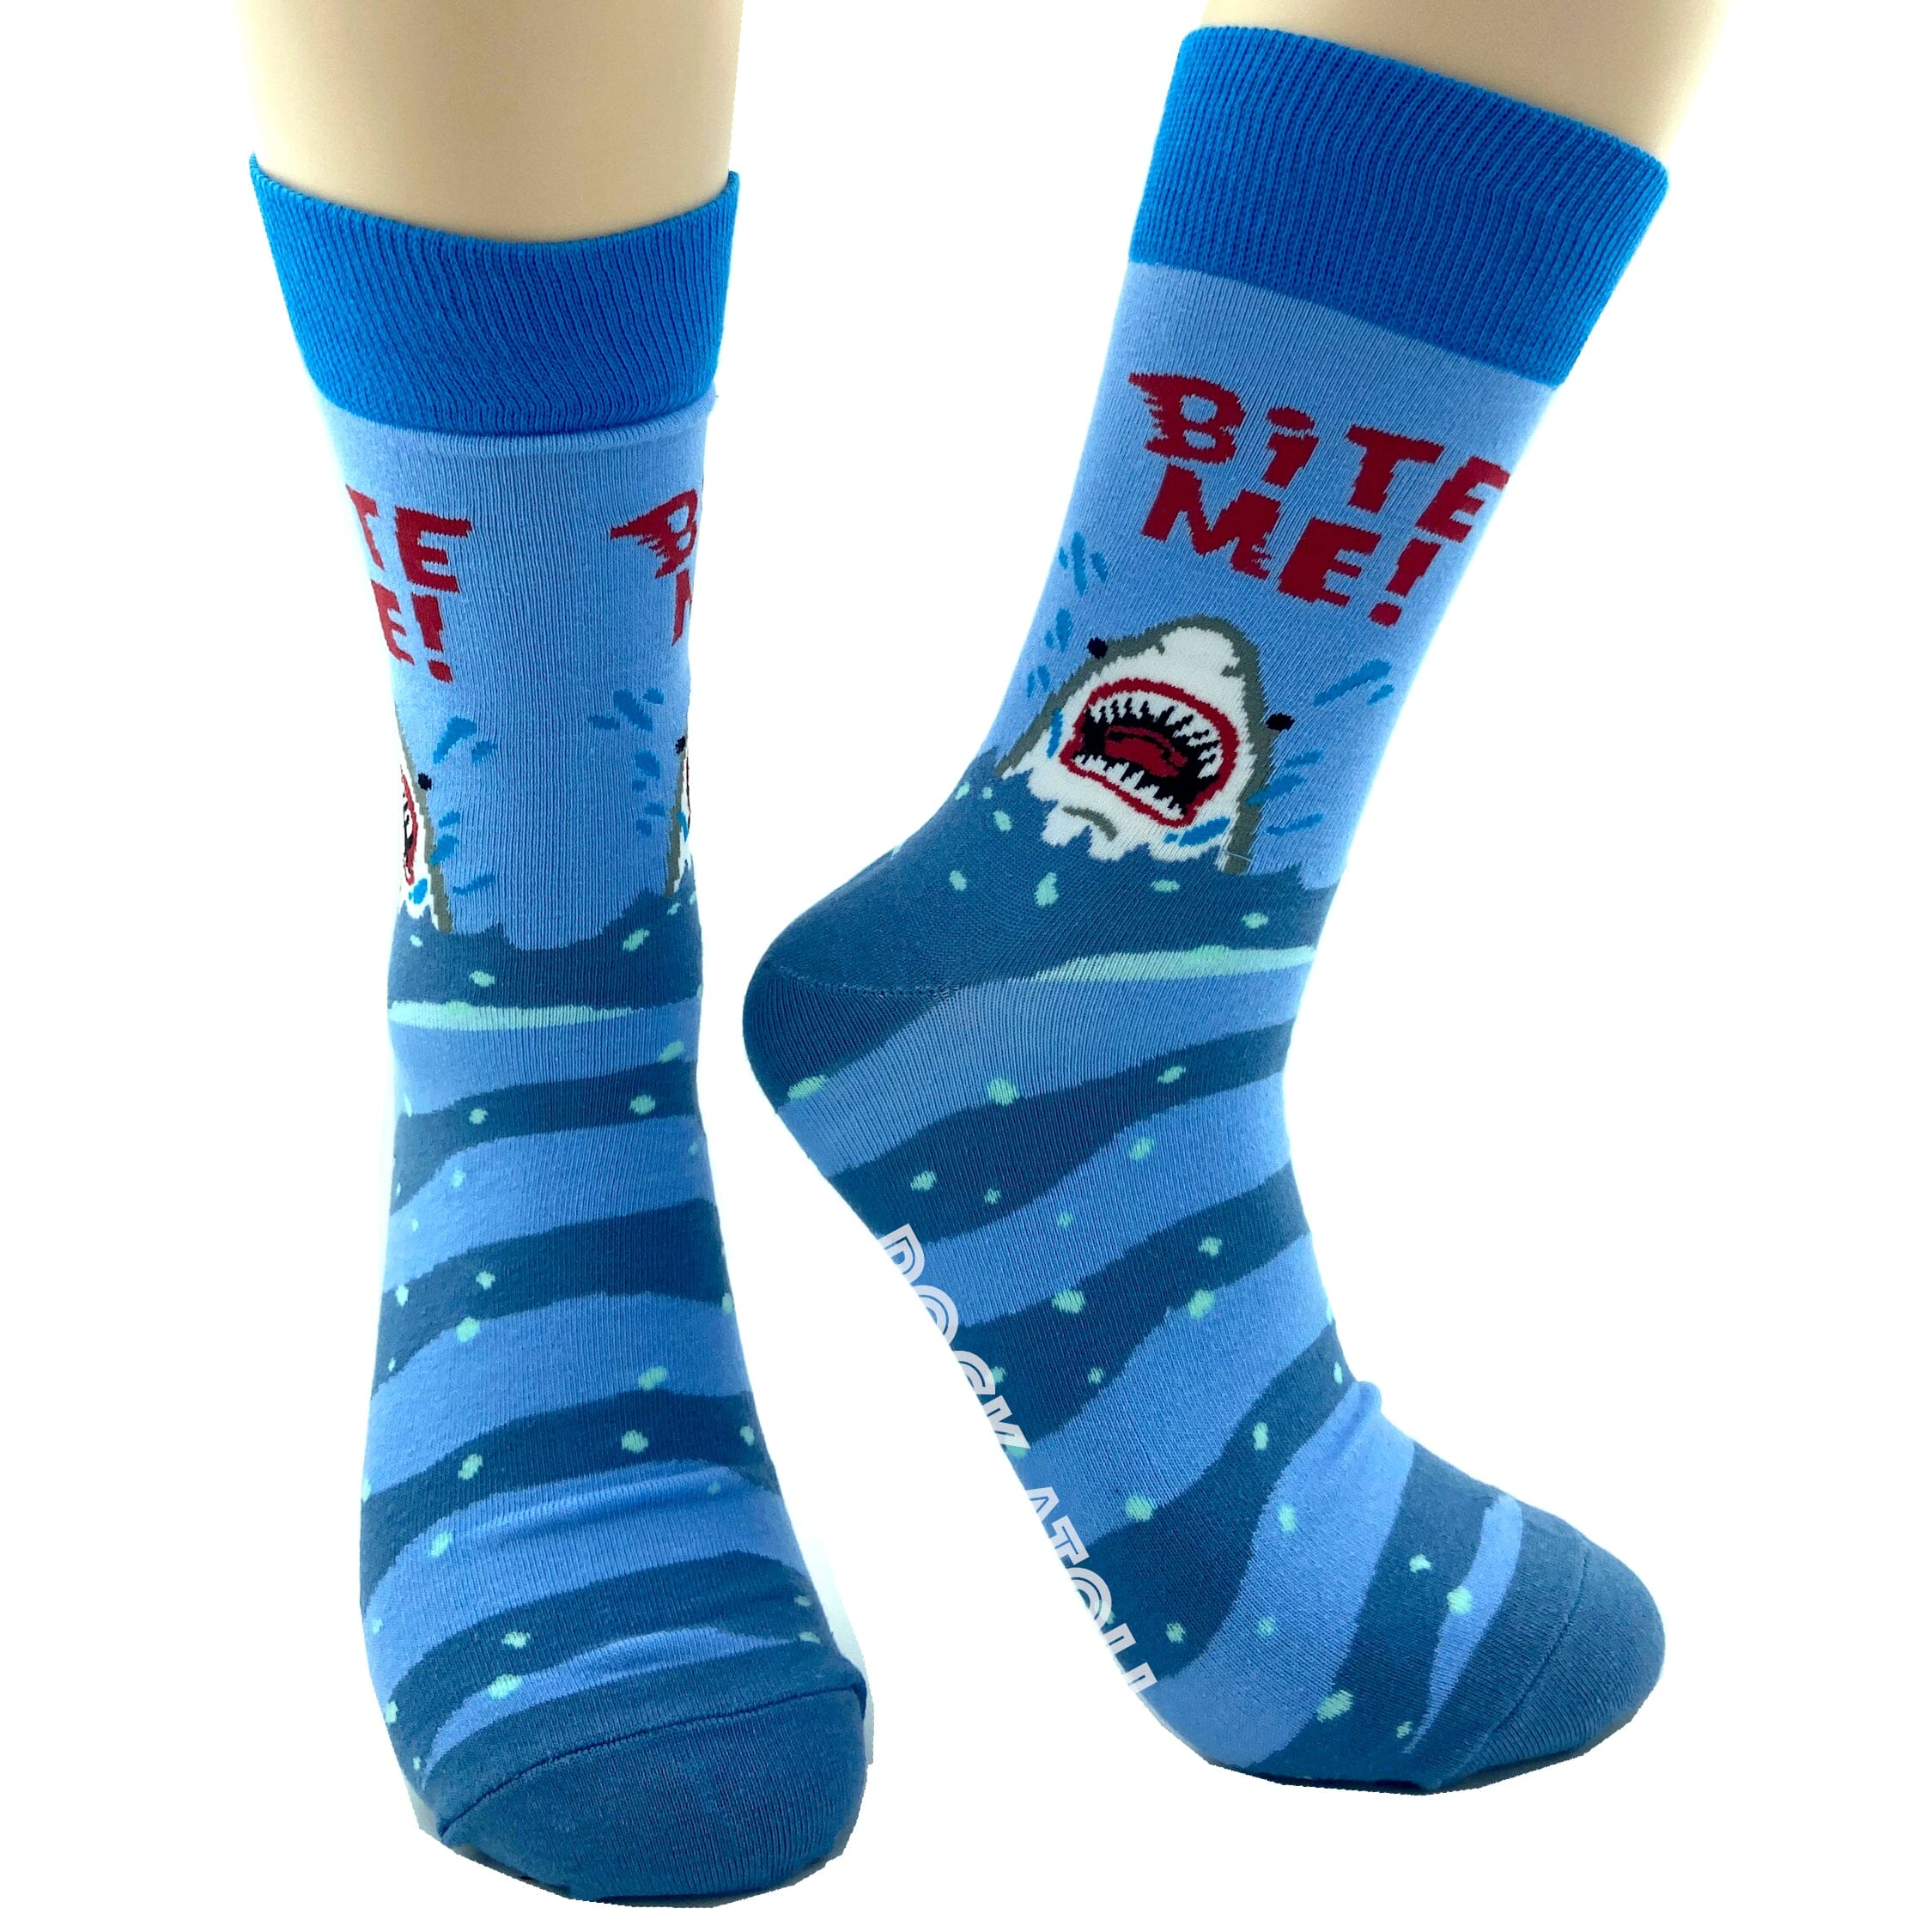 Classic Jaws Inspired Shark Patterned Novelty Crew Socks in Bright Blue